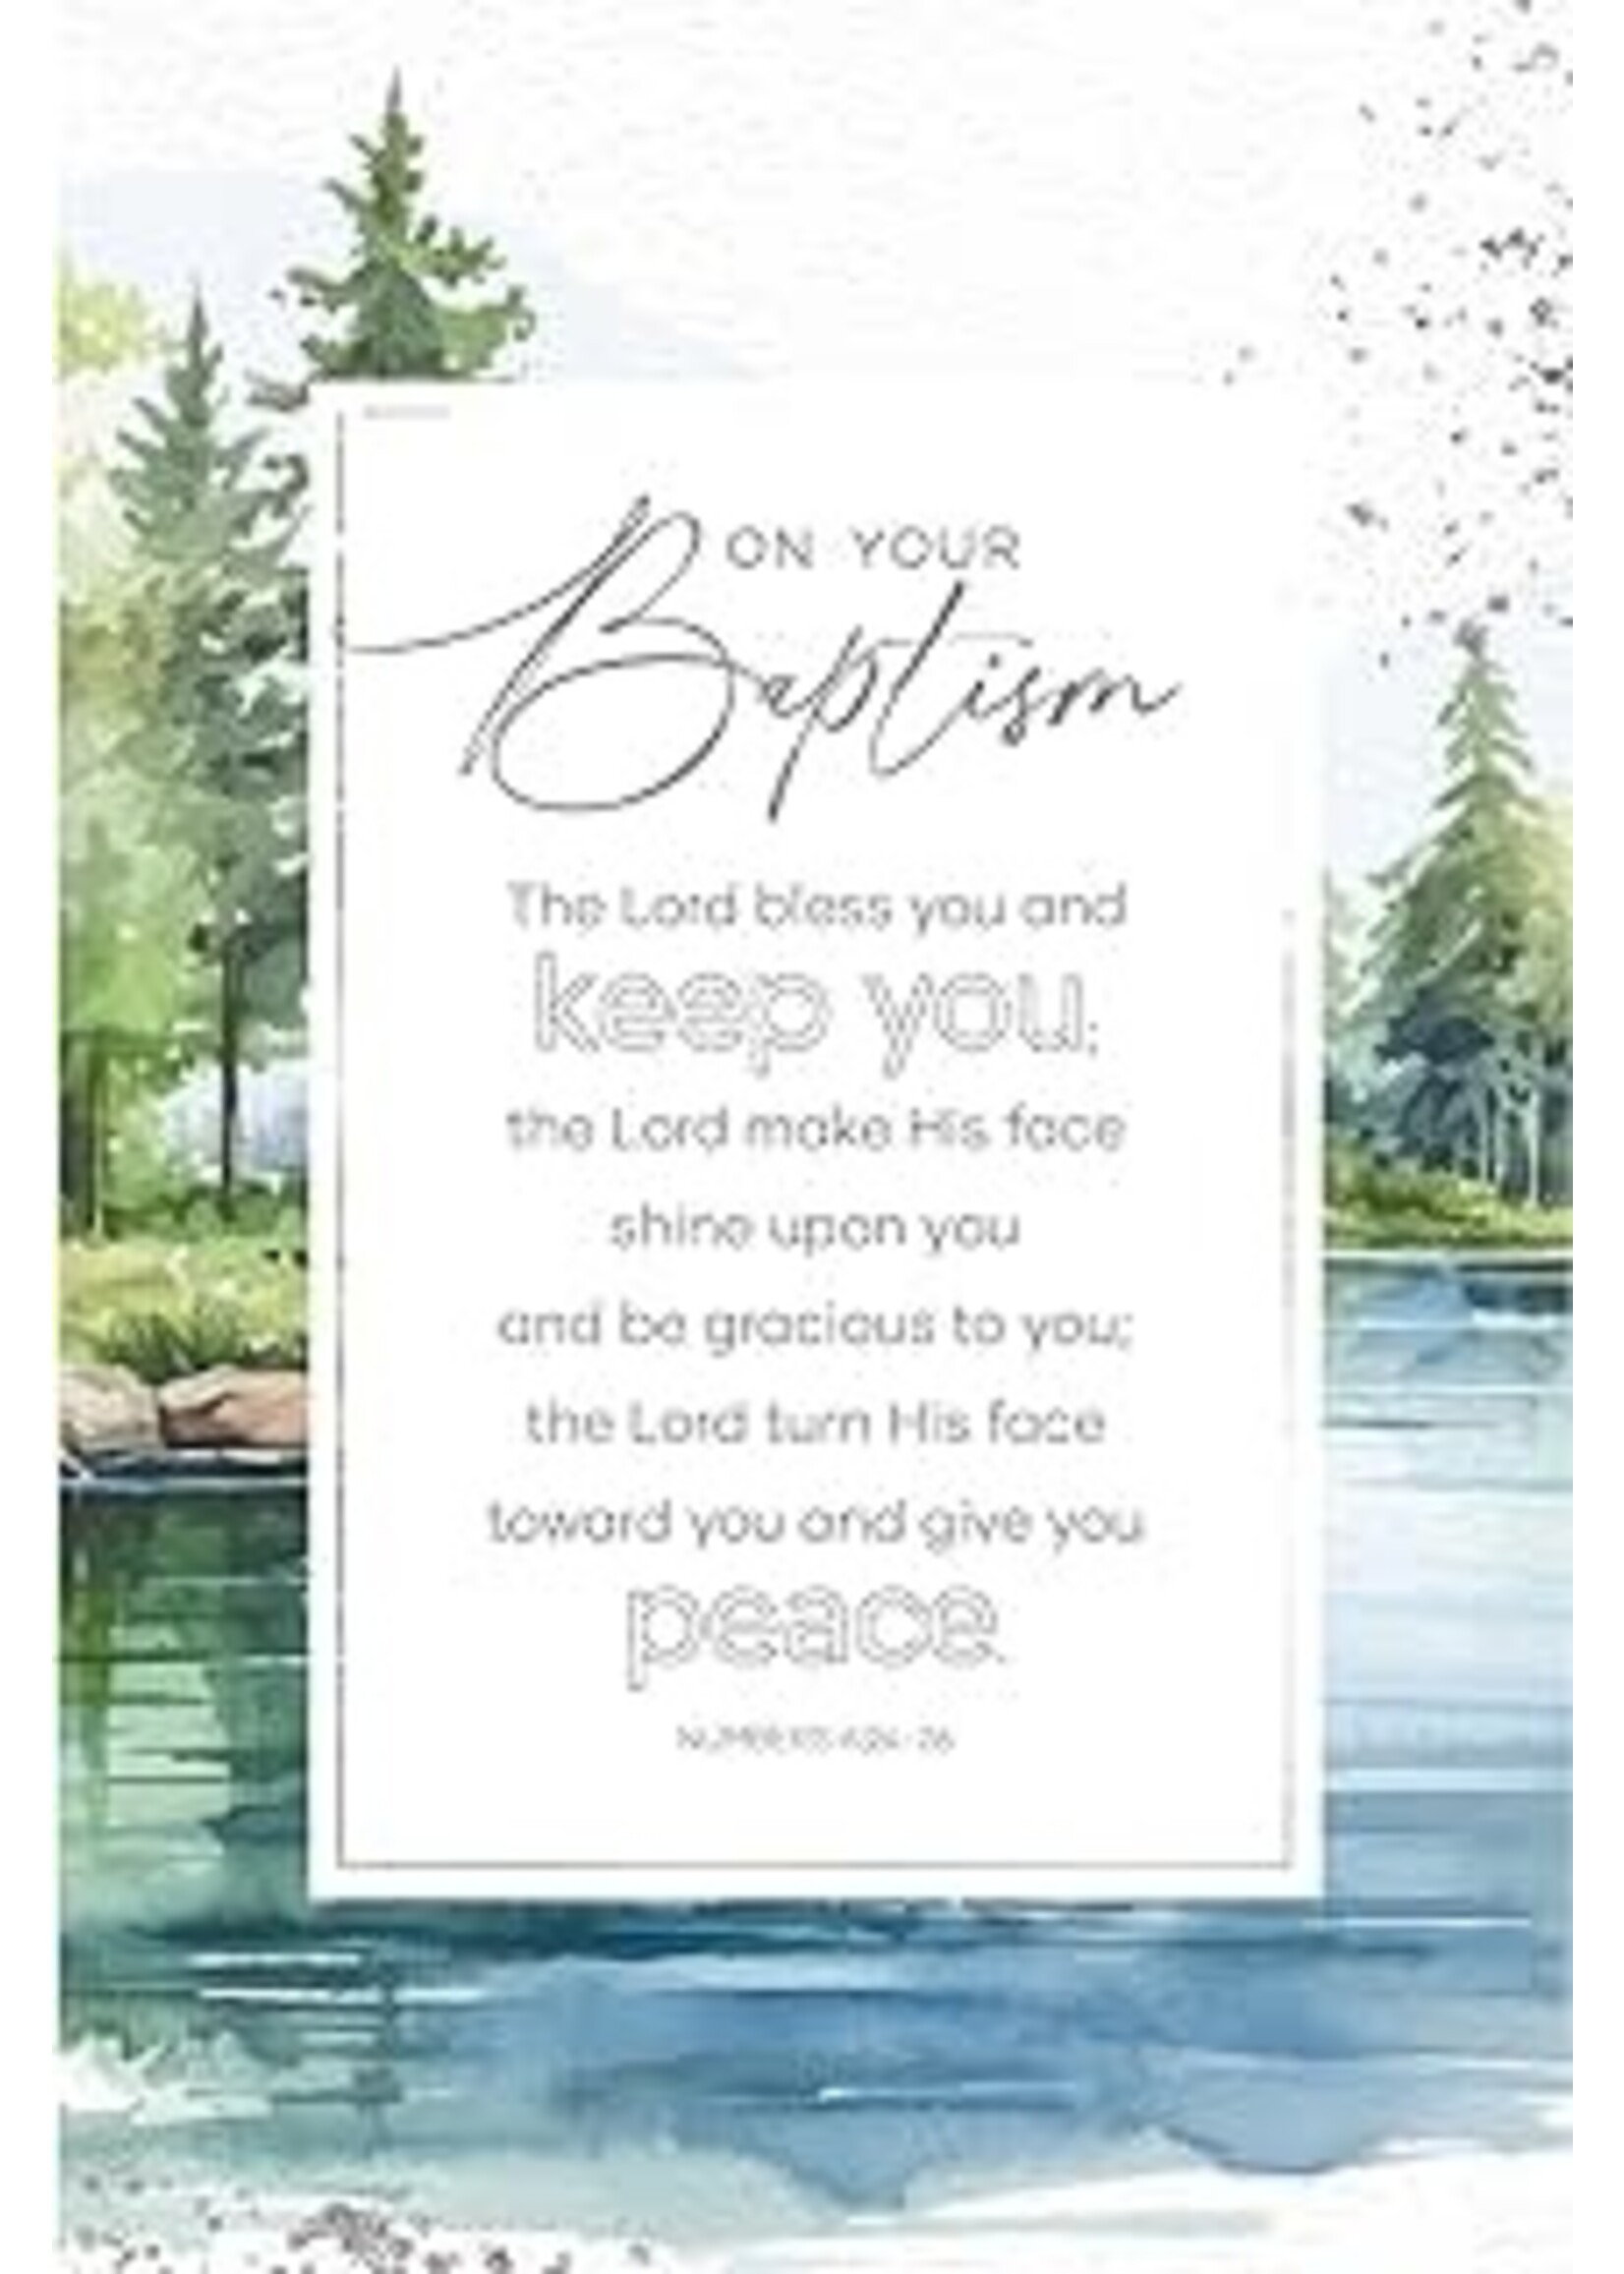 On Your Baptism - 6x9 plaque